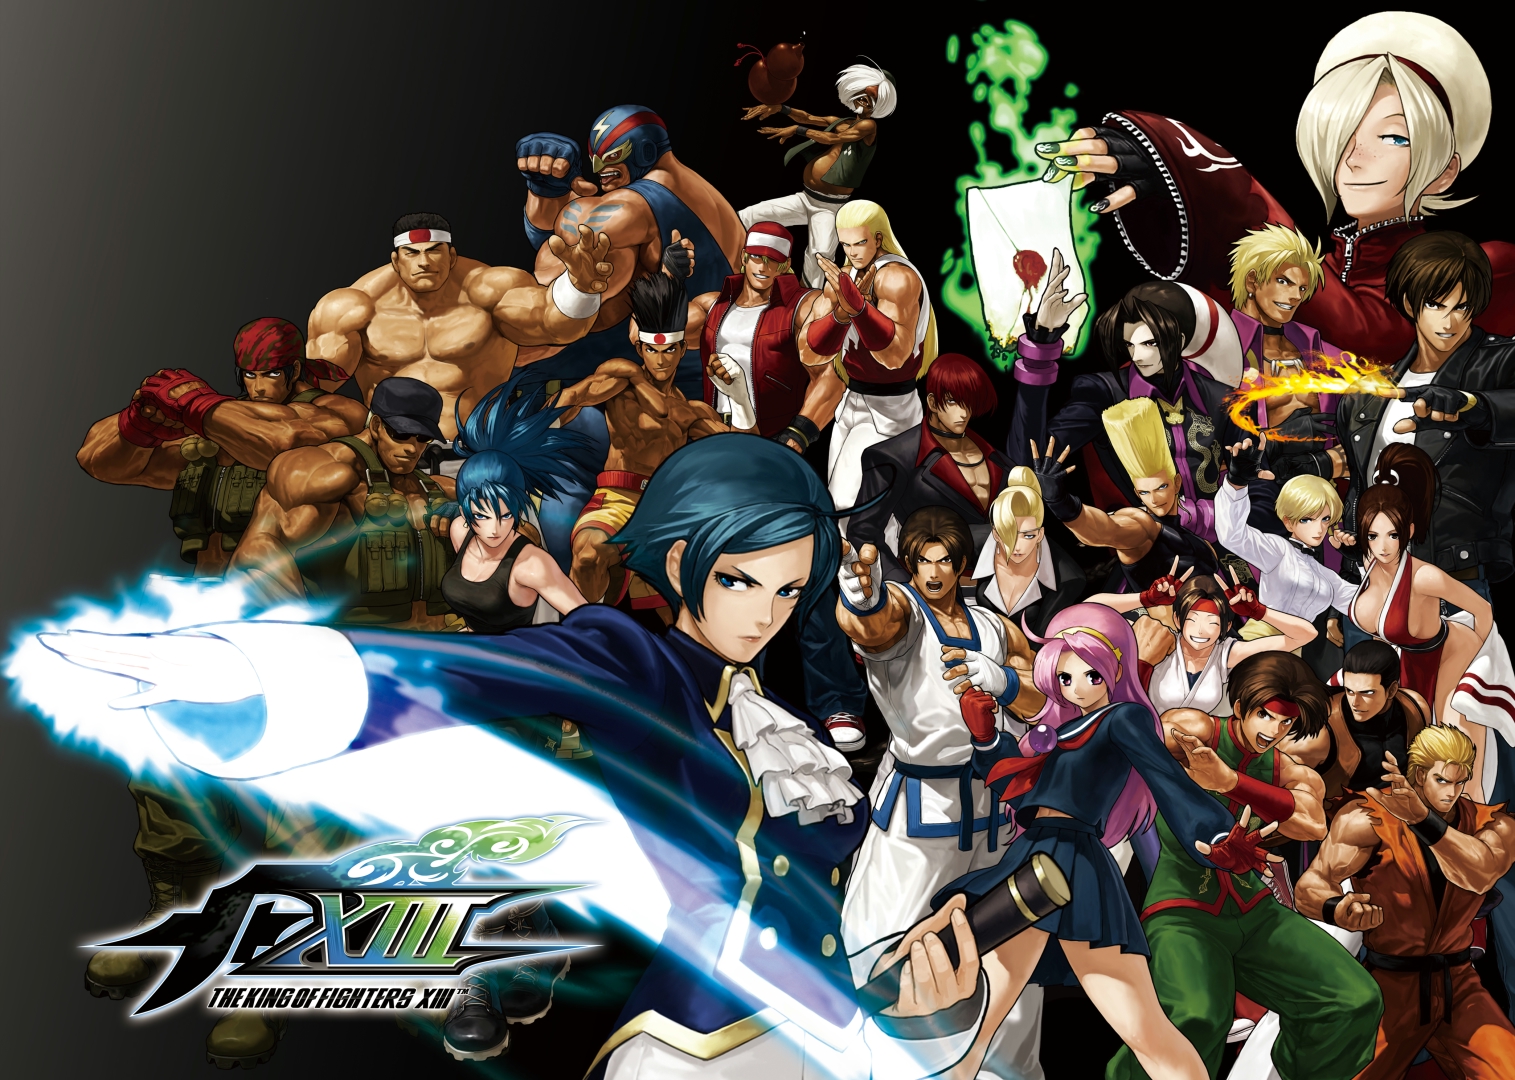 Nice Images Collection: King Of Fighters Desktop Wallpapers